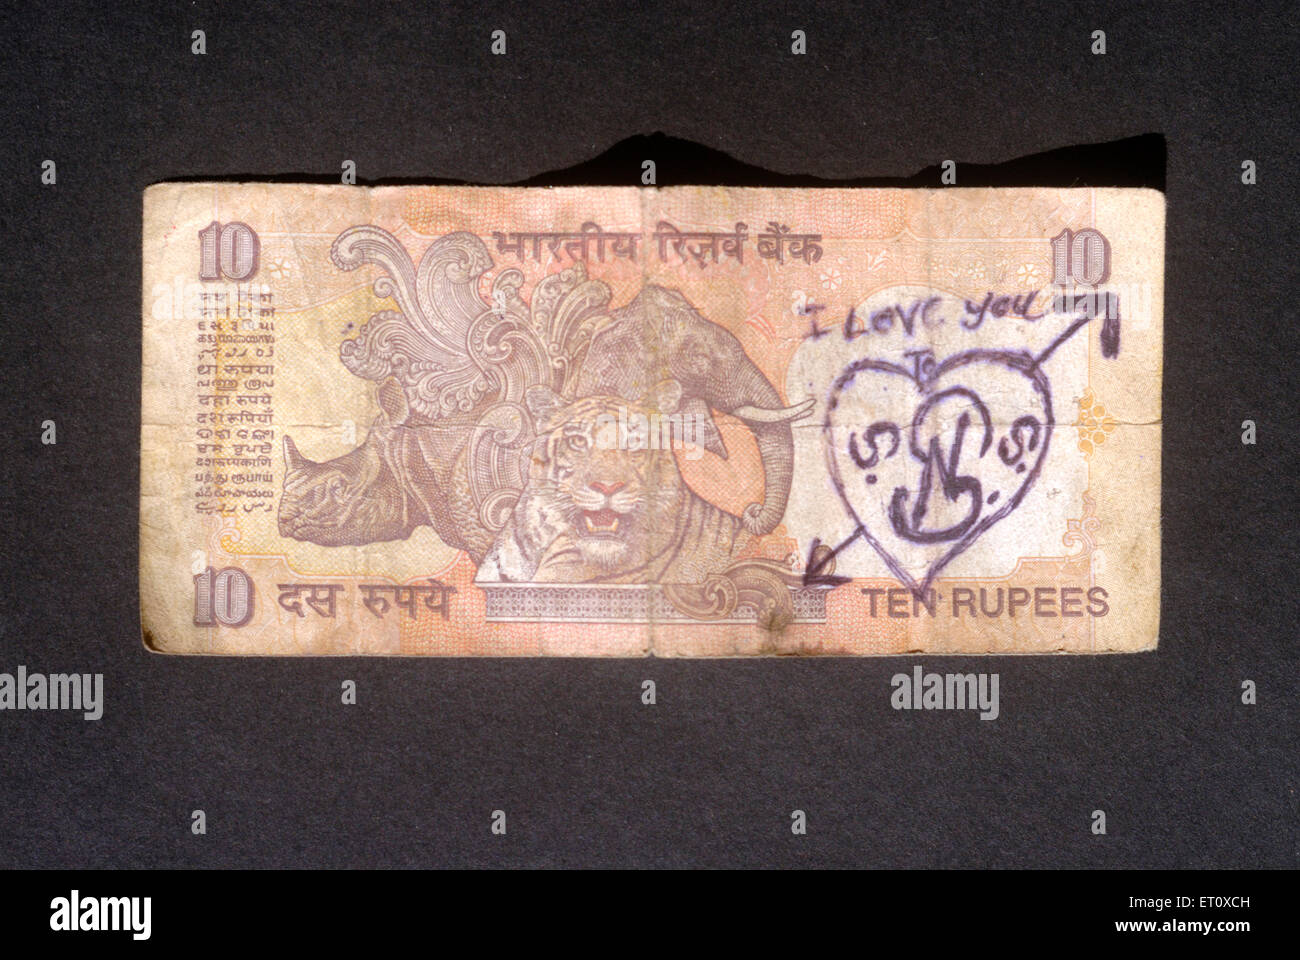 Ten rupees note damaged by writing I Love you and drawing love sign heart on black background Stock Photo